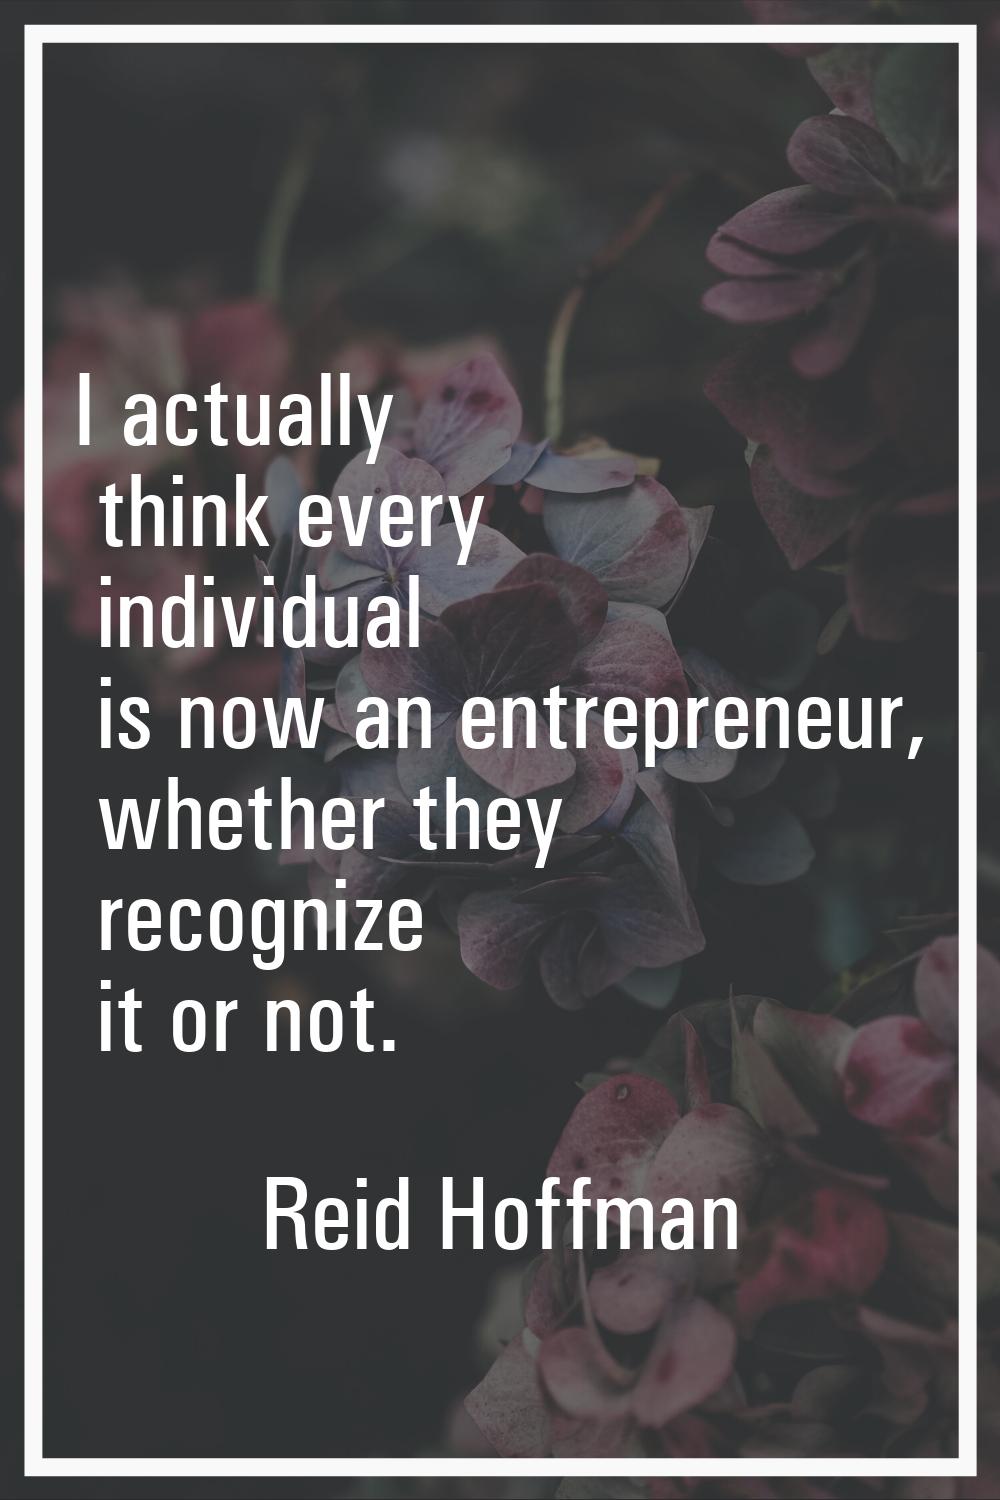 I actually think every individual is now an entrepreneur, whether they recognize it or not.